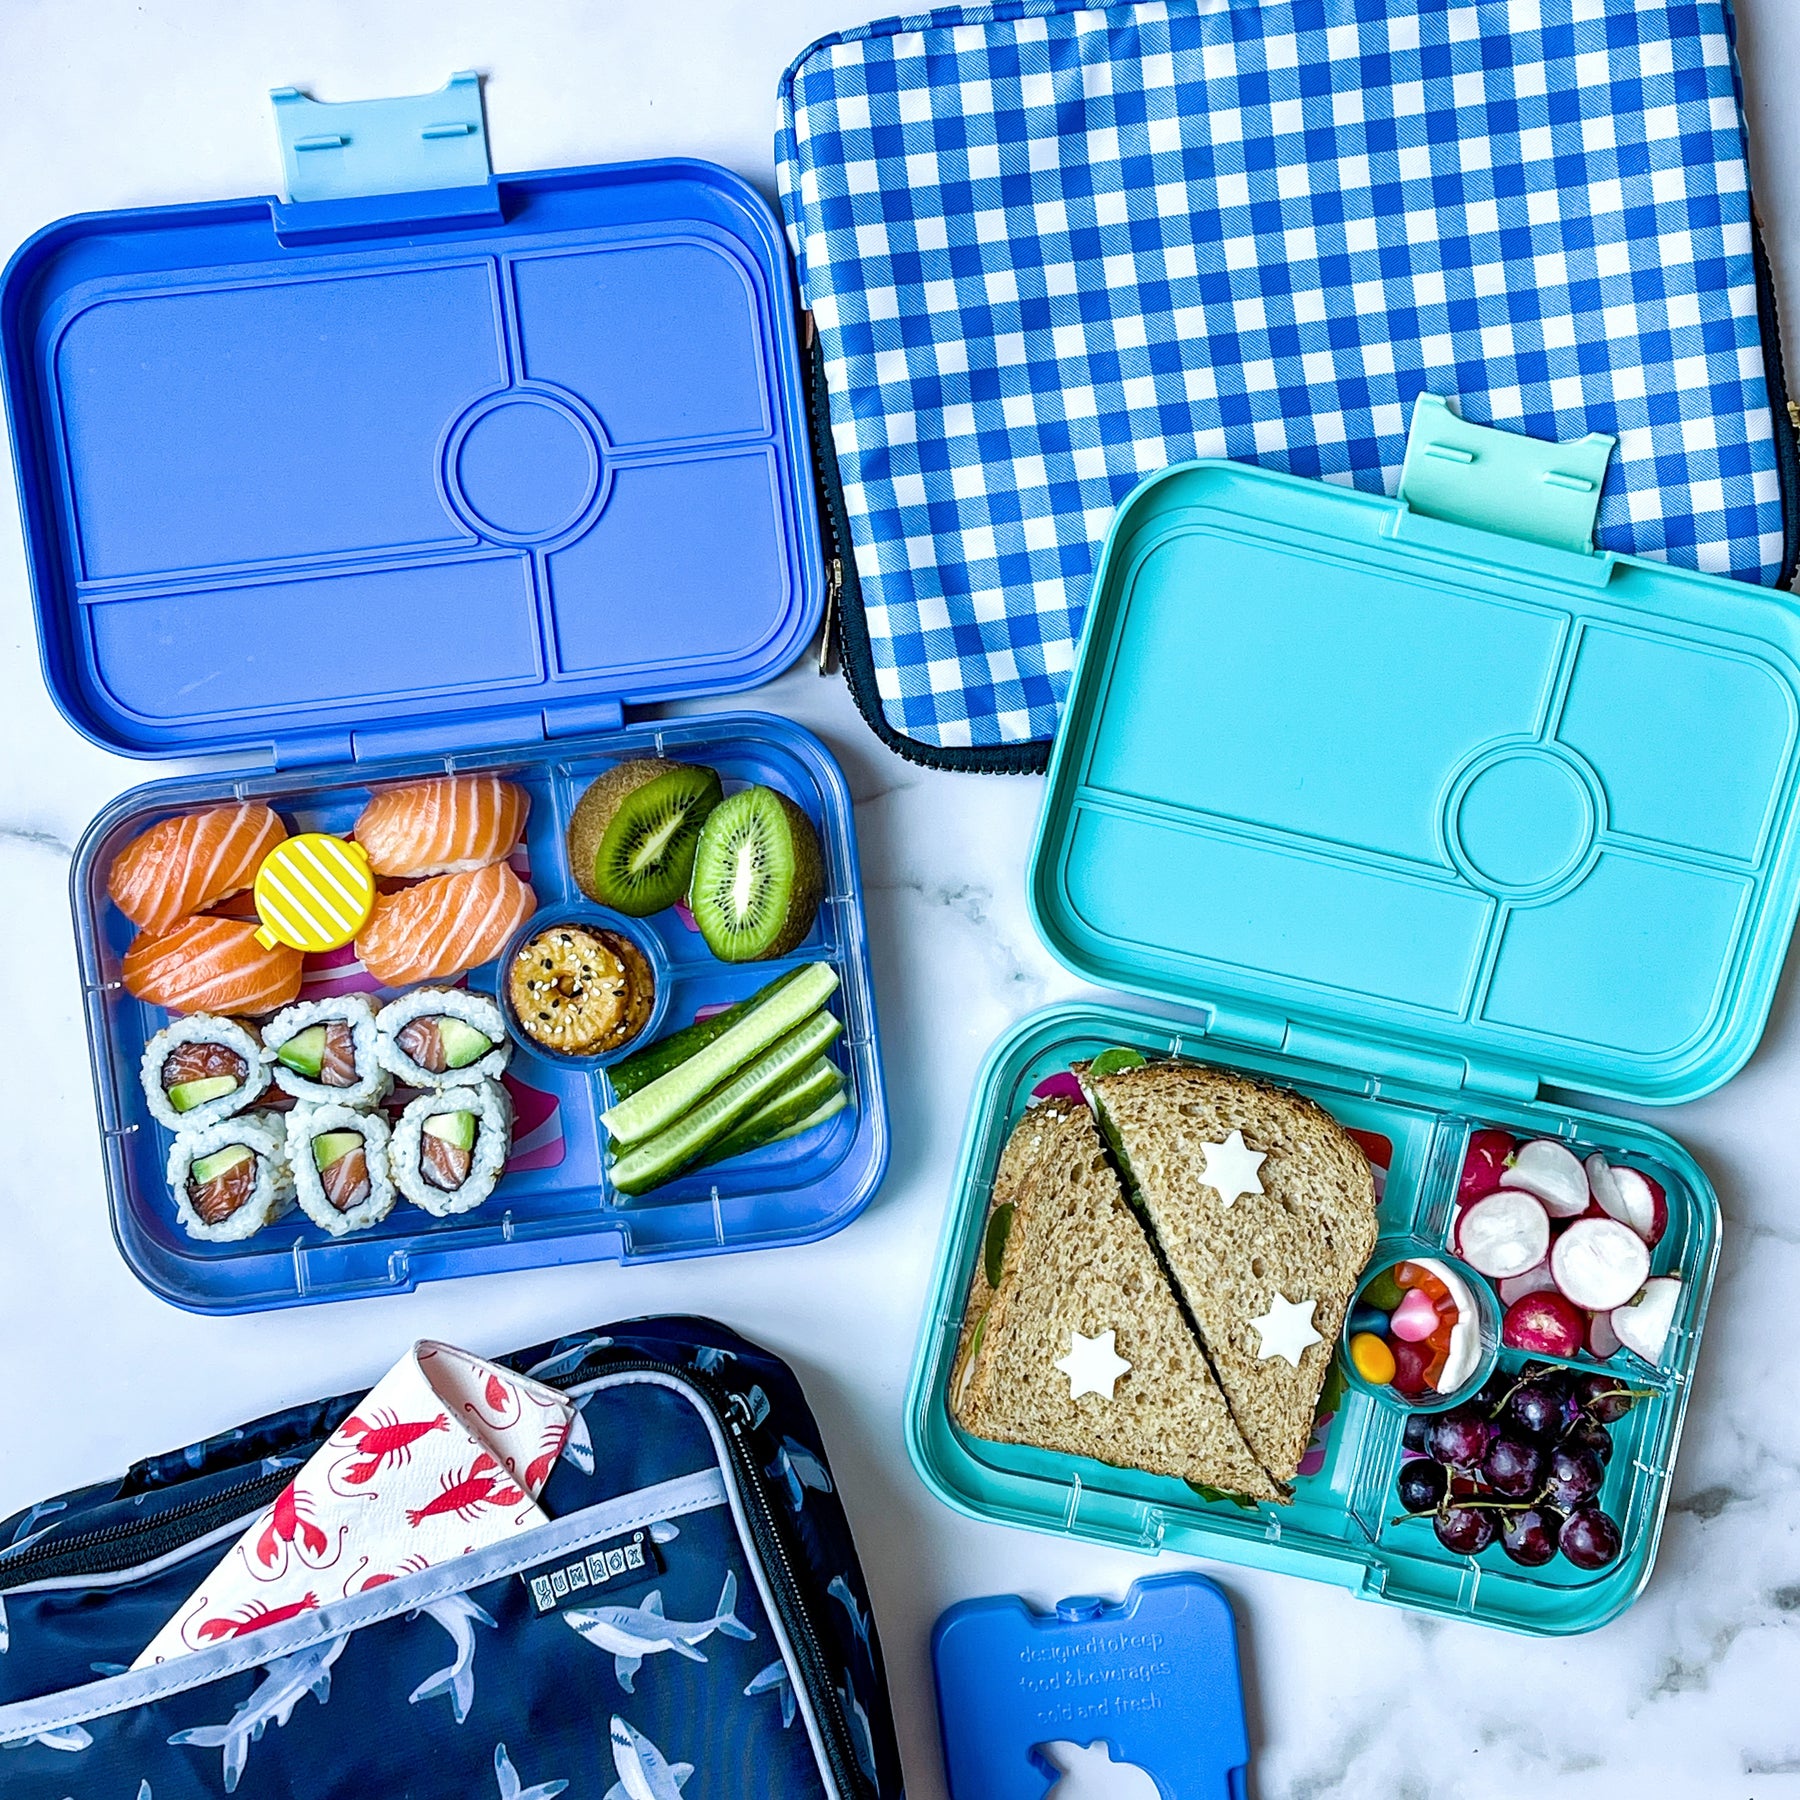 Yumbox - Tapas Spare 4 Tray Clear - Zest Kitchen Shop